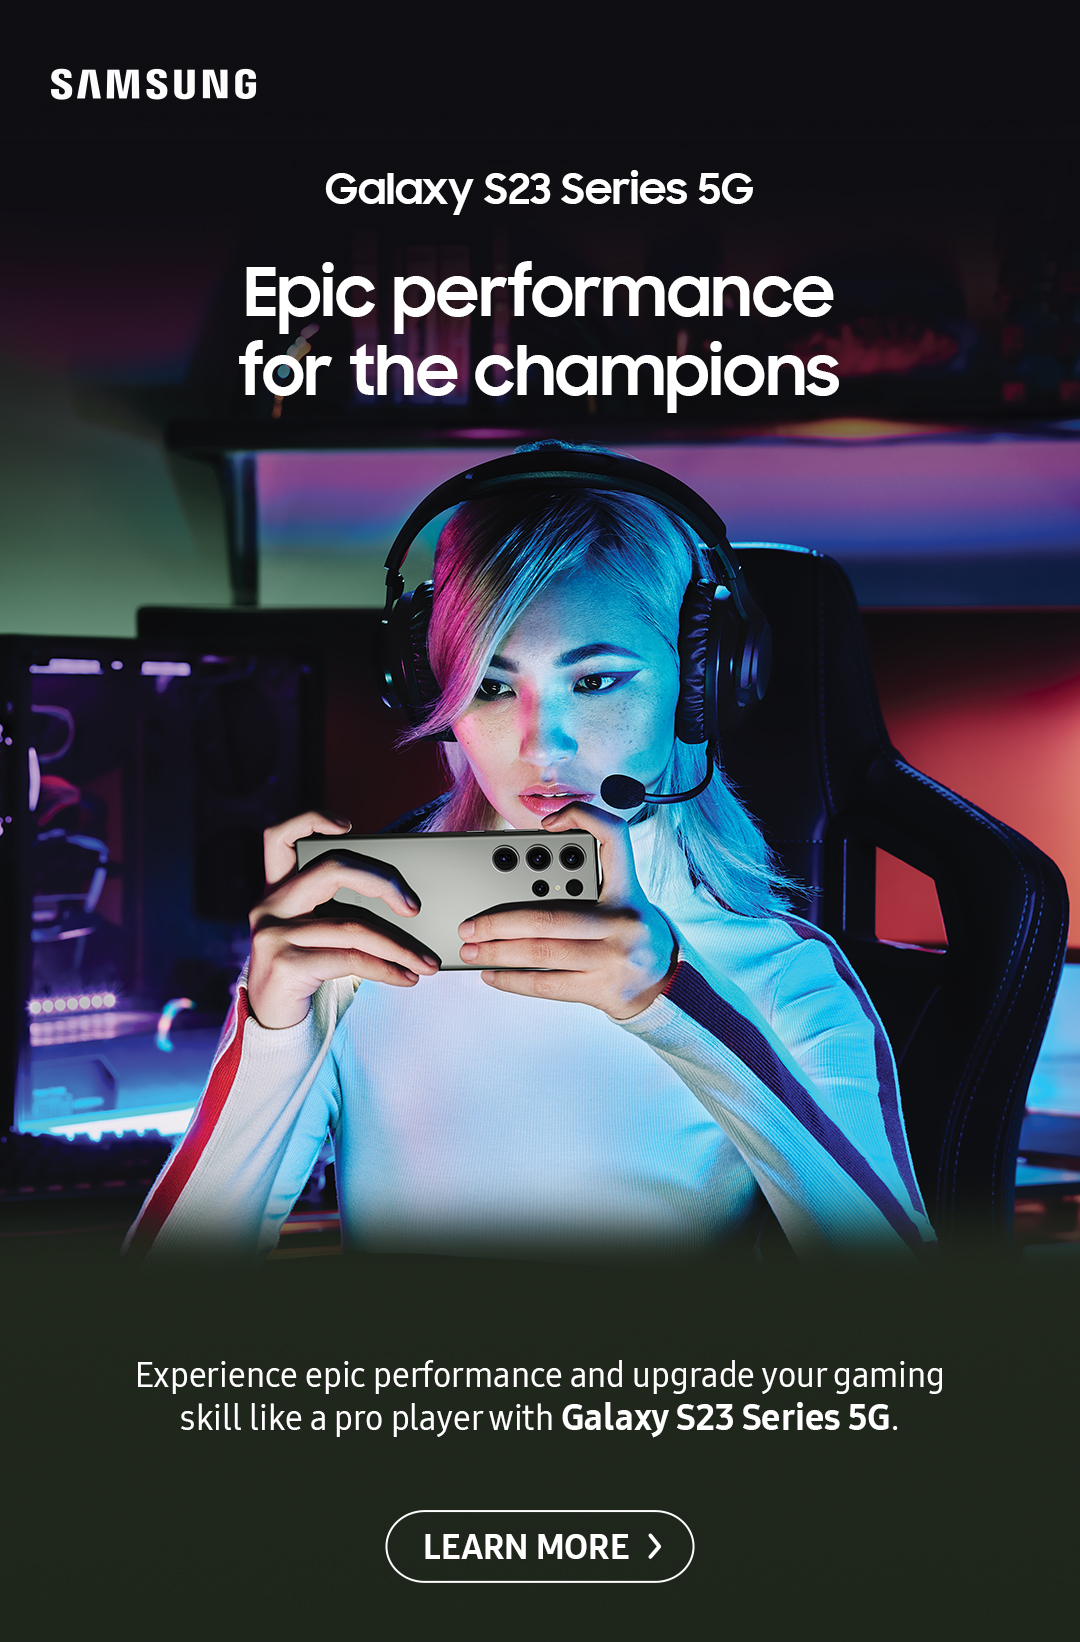 Samsung Galaxy S23 Series 5G: Epic performance for the champions | Experience epic performance and upgrade your gaming skill like a pro layer with Galaxy S23 Series 5G. Click here to learn more!